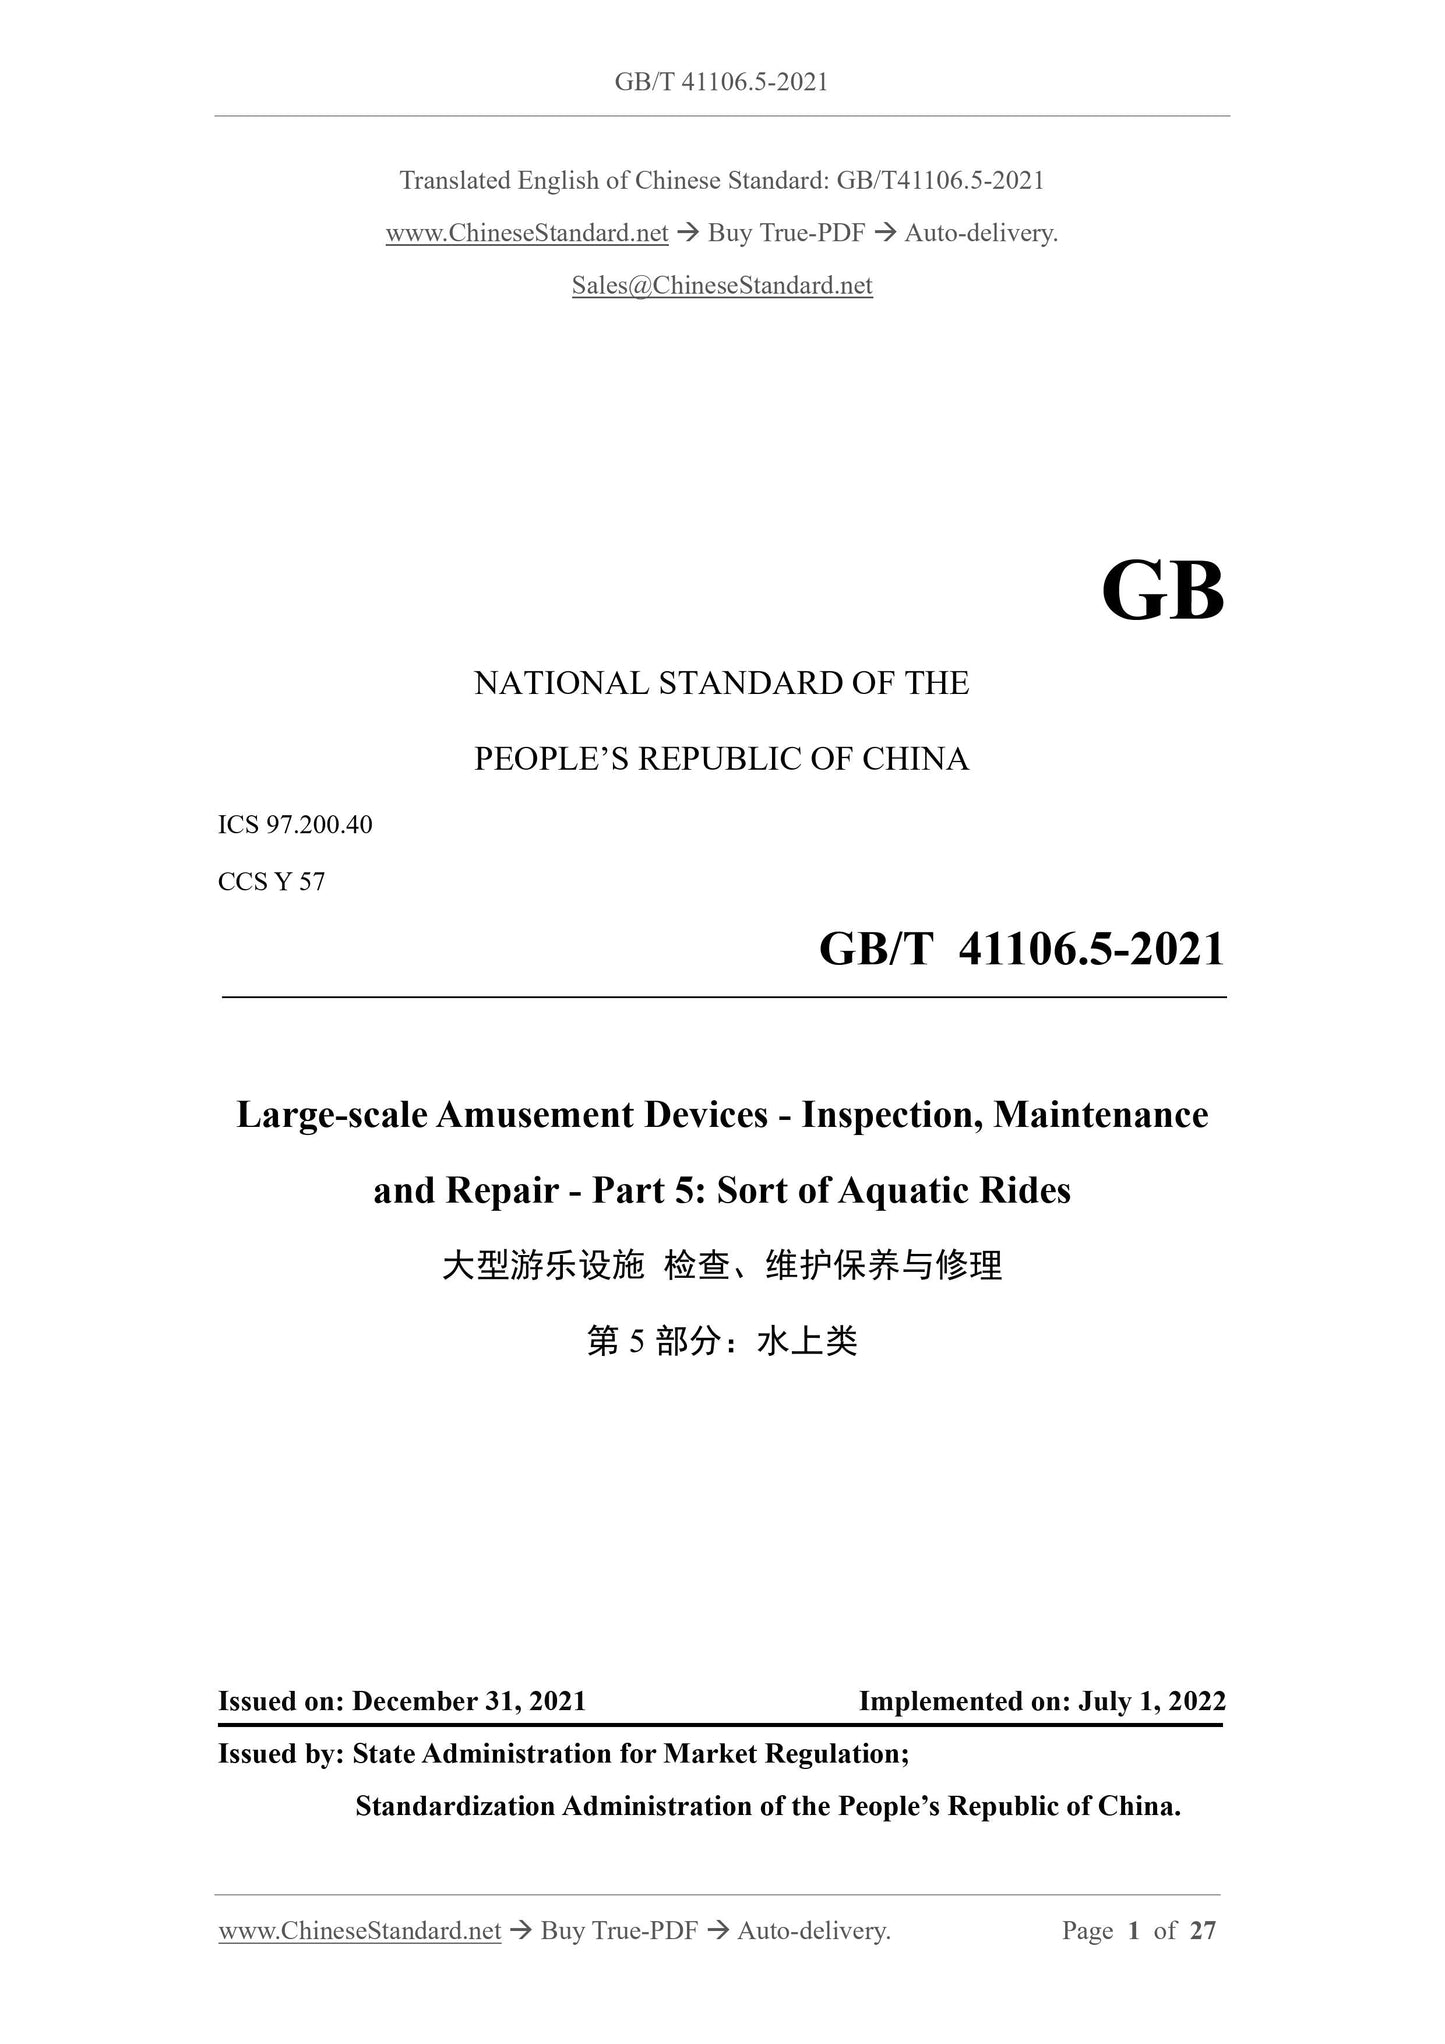 GB/T 41106.5-2021 Page 1